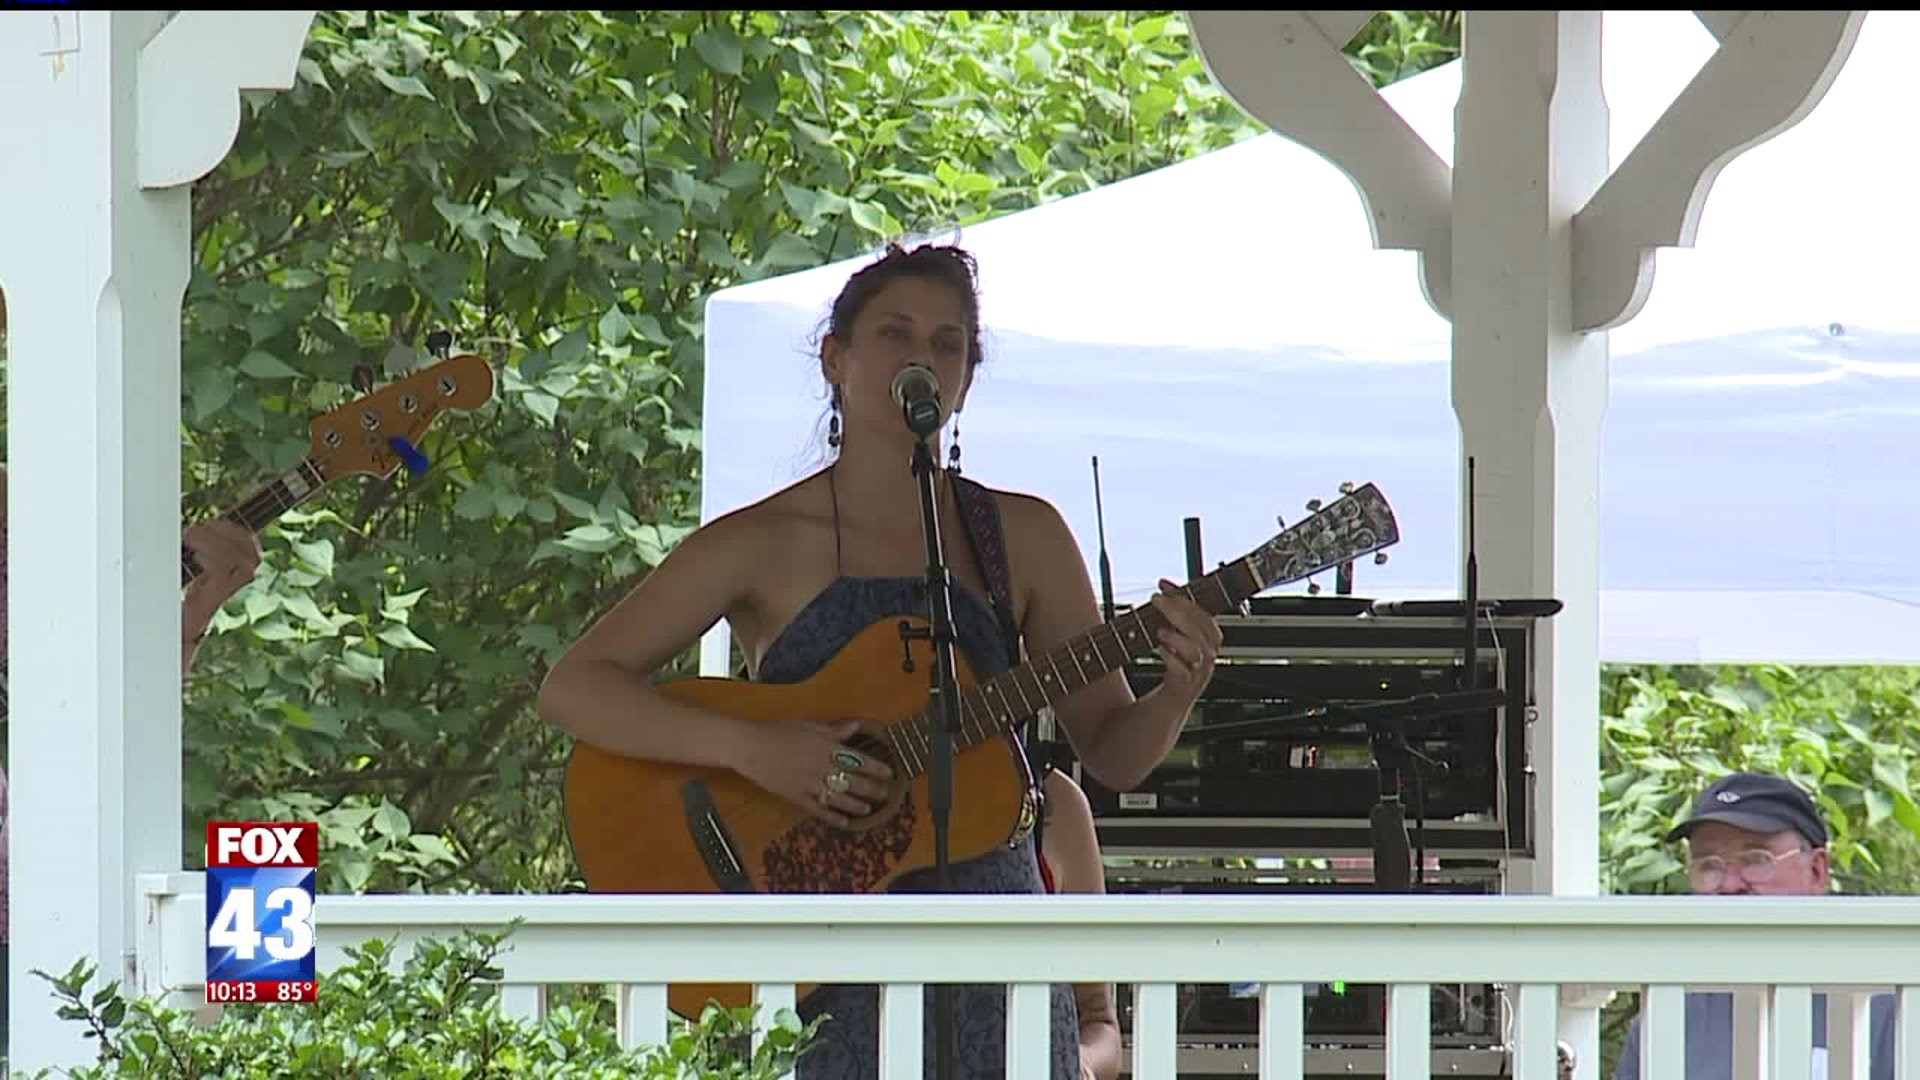 Appalachian Trail Music Festival brings community and hikers together in Cumberland County